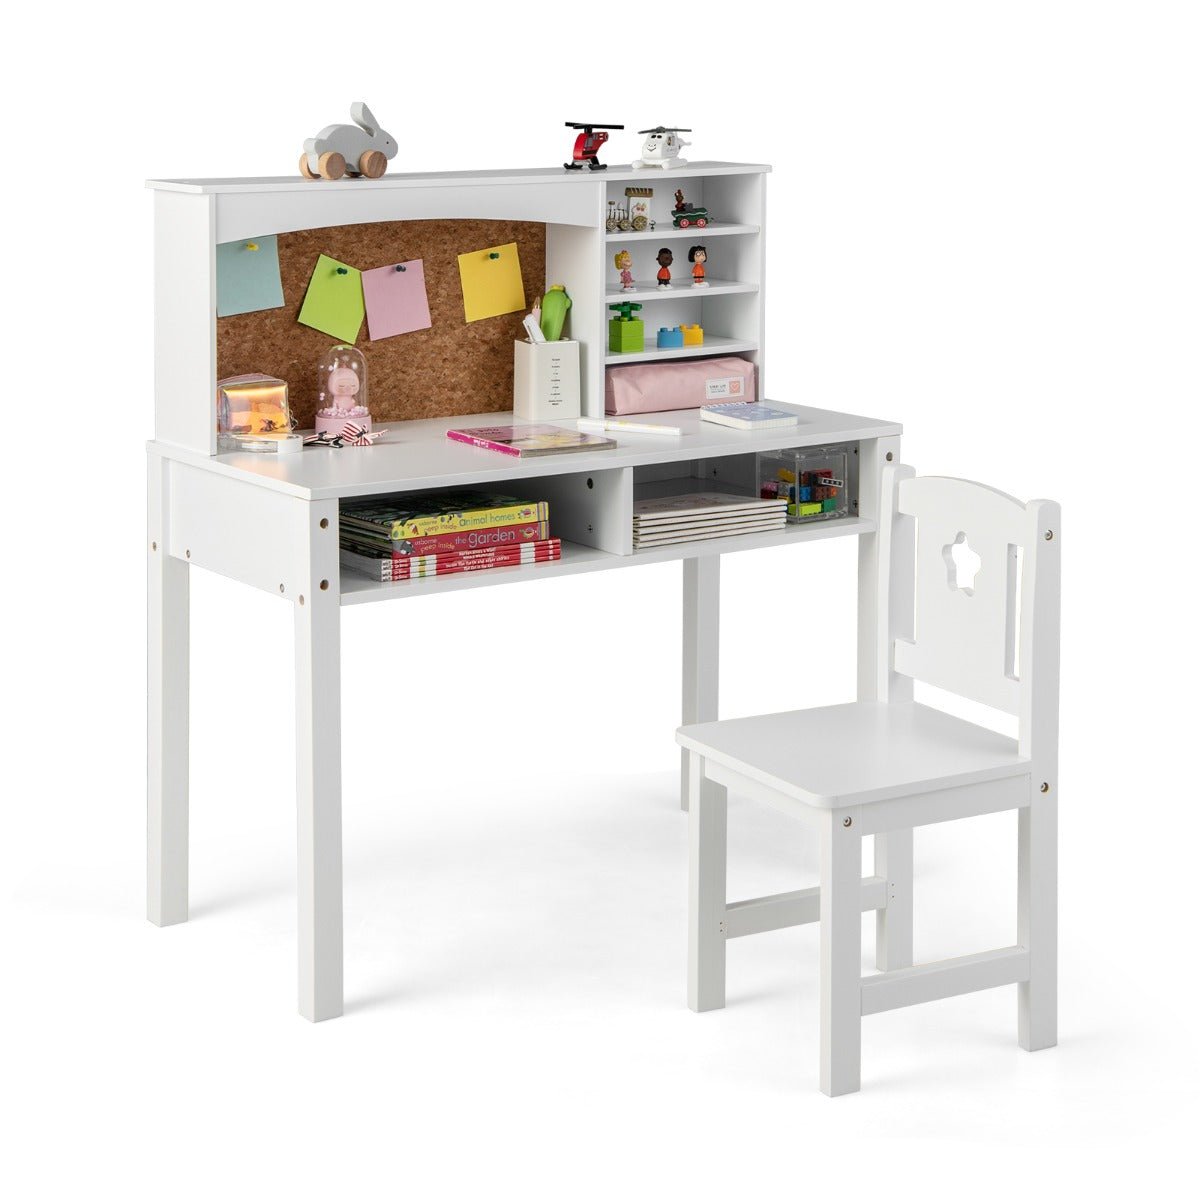 Shop Kids Desk and Chair Set with Solid Wood Legs for 3+ Kids